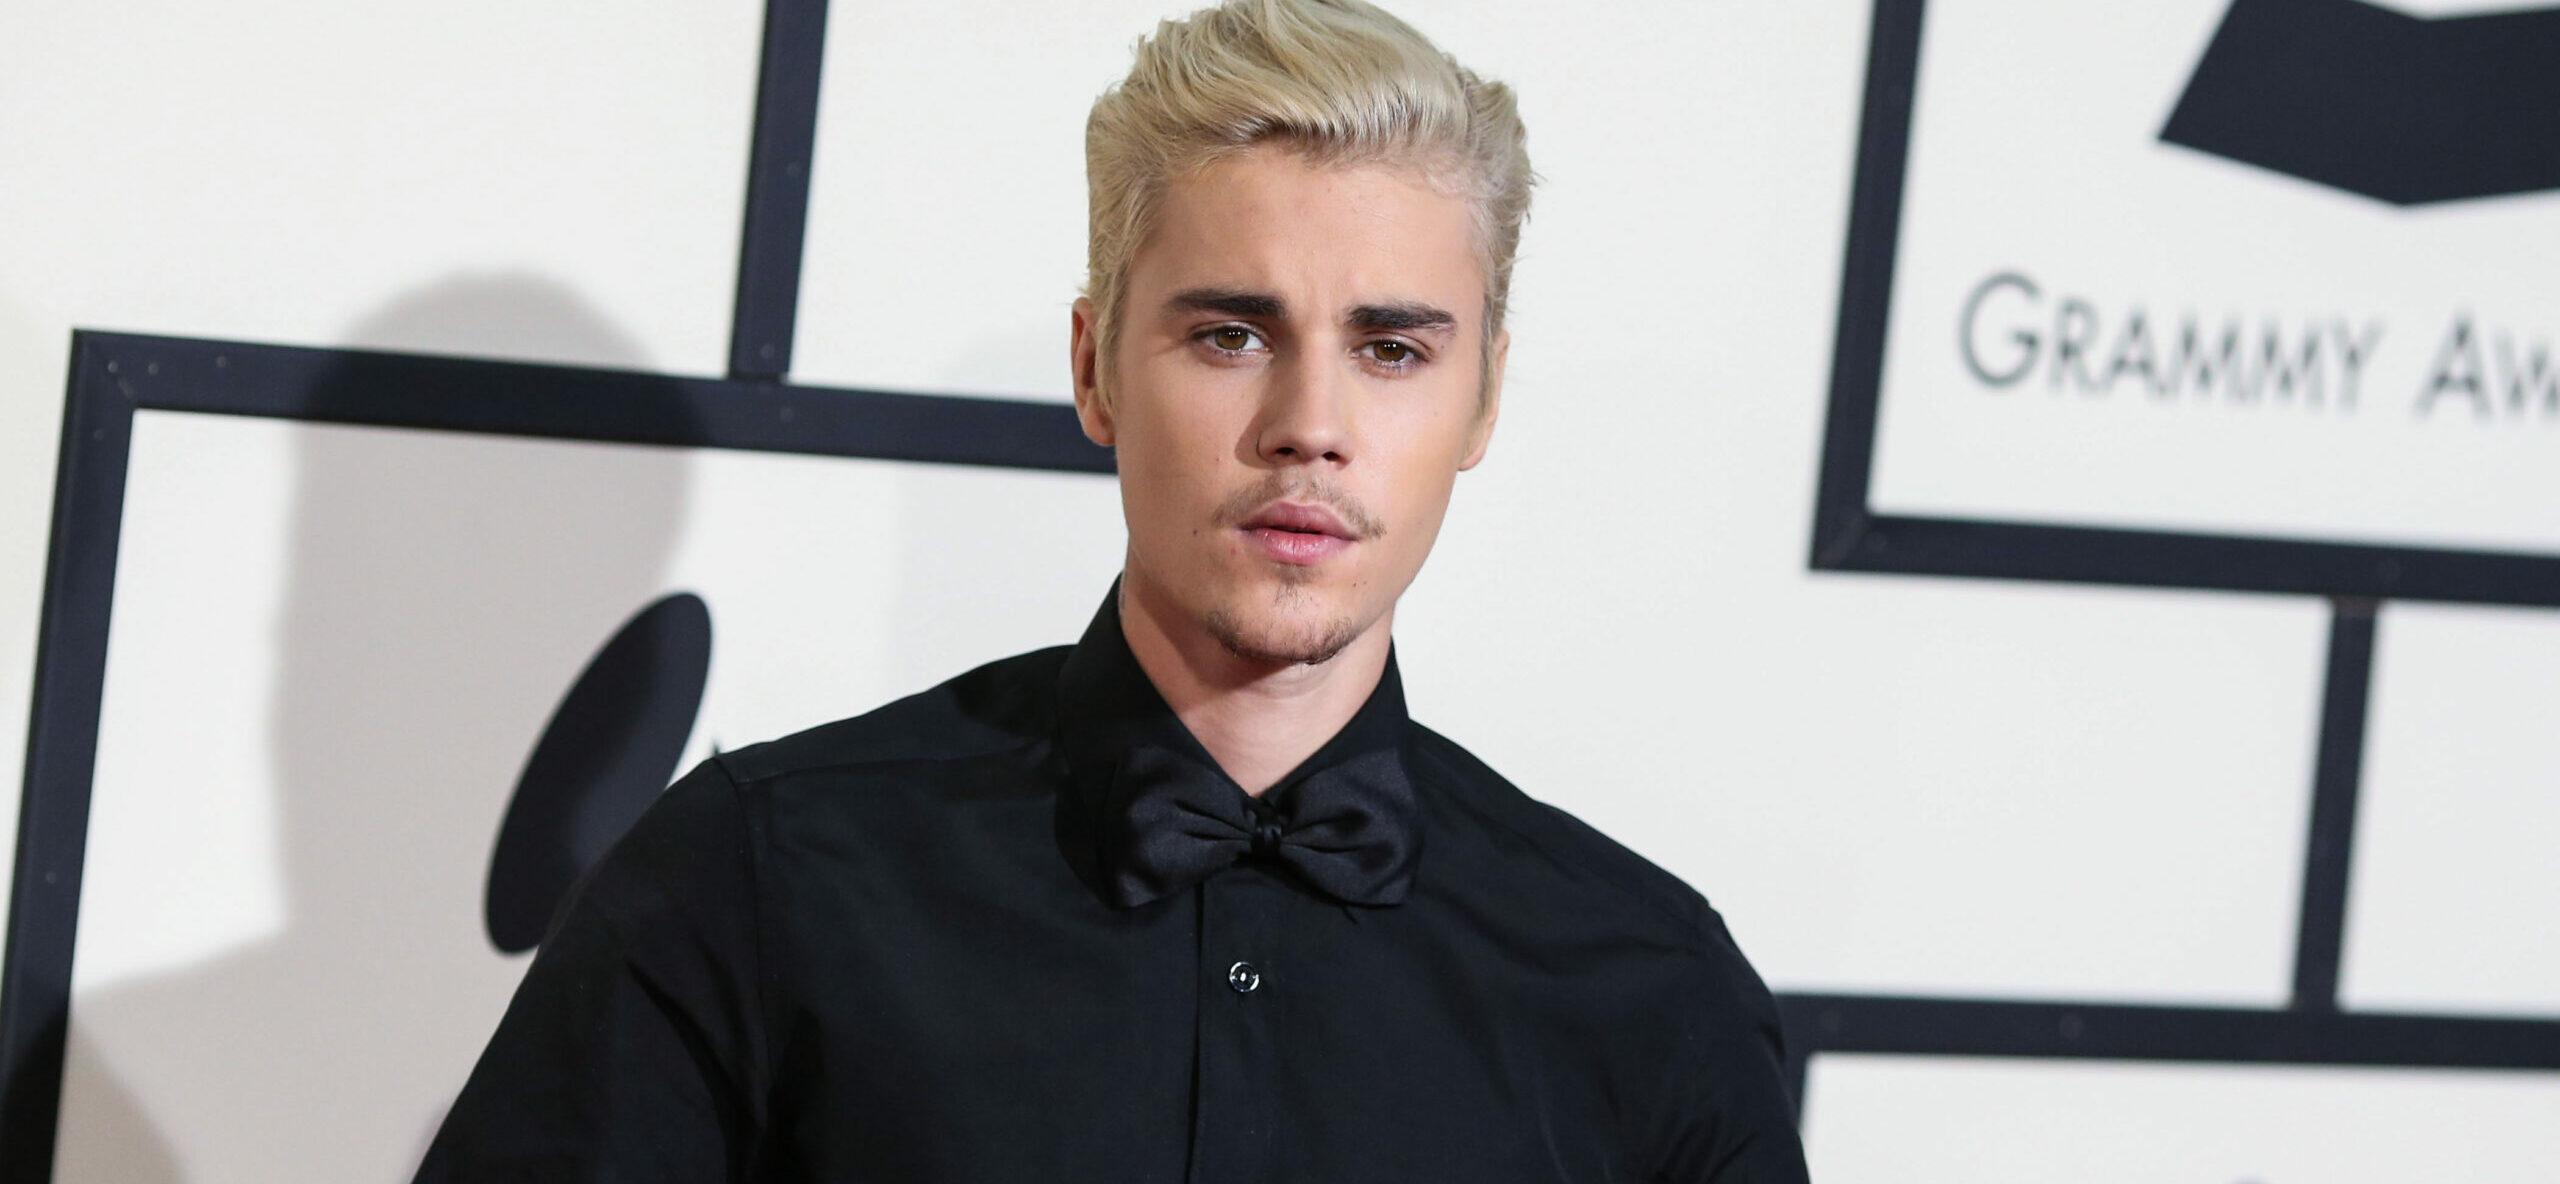 Justin Bieber SLAMMED For Following Through With Concert In Saudi Arabia